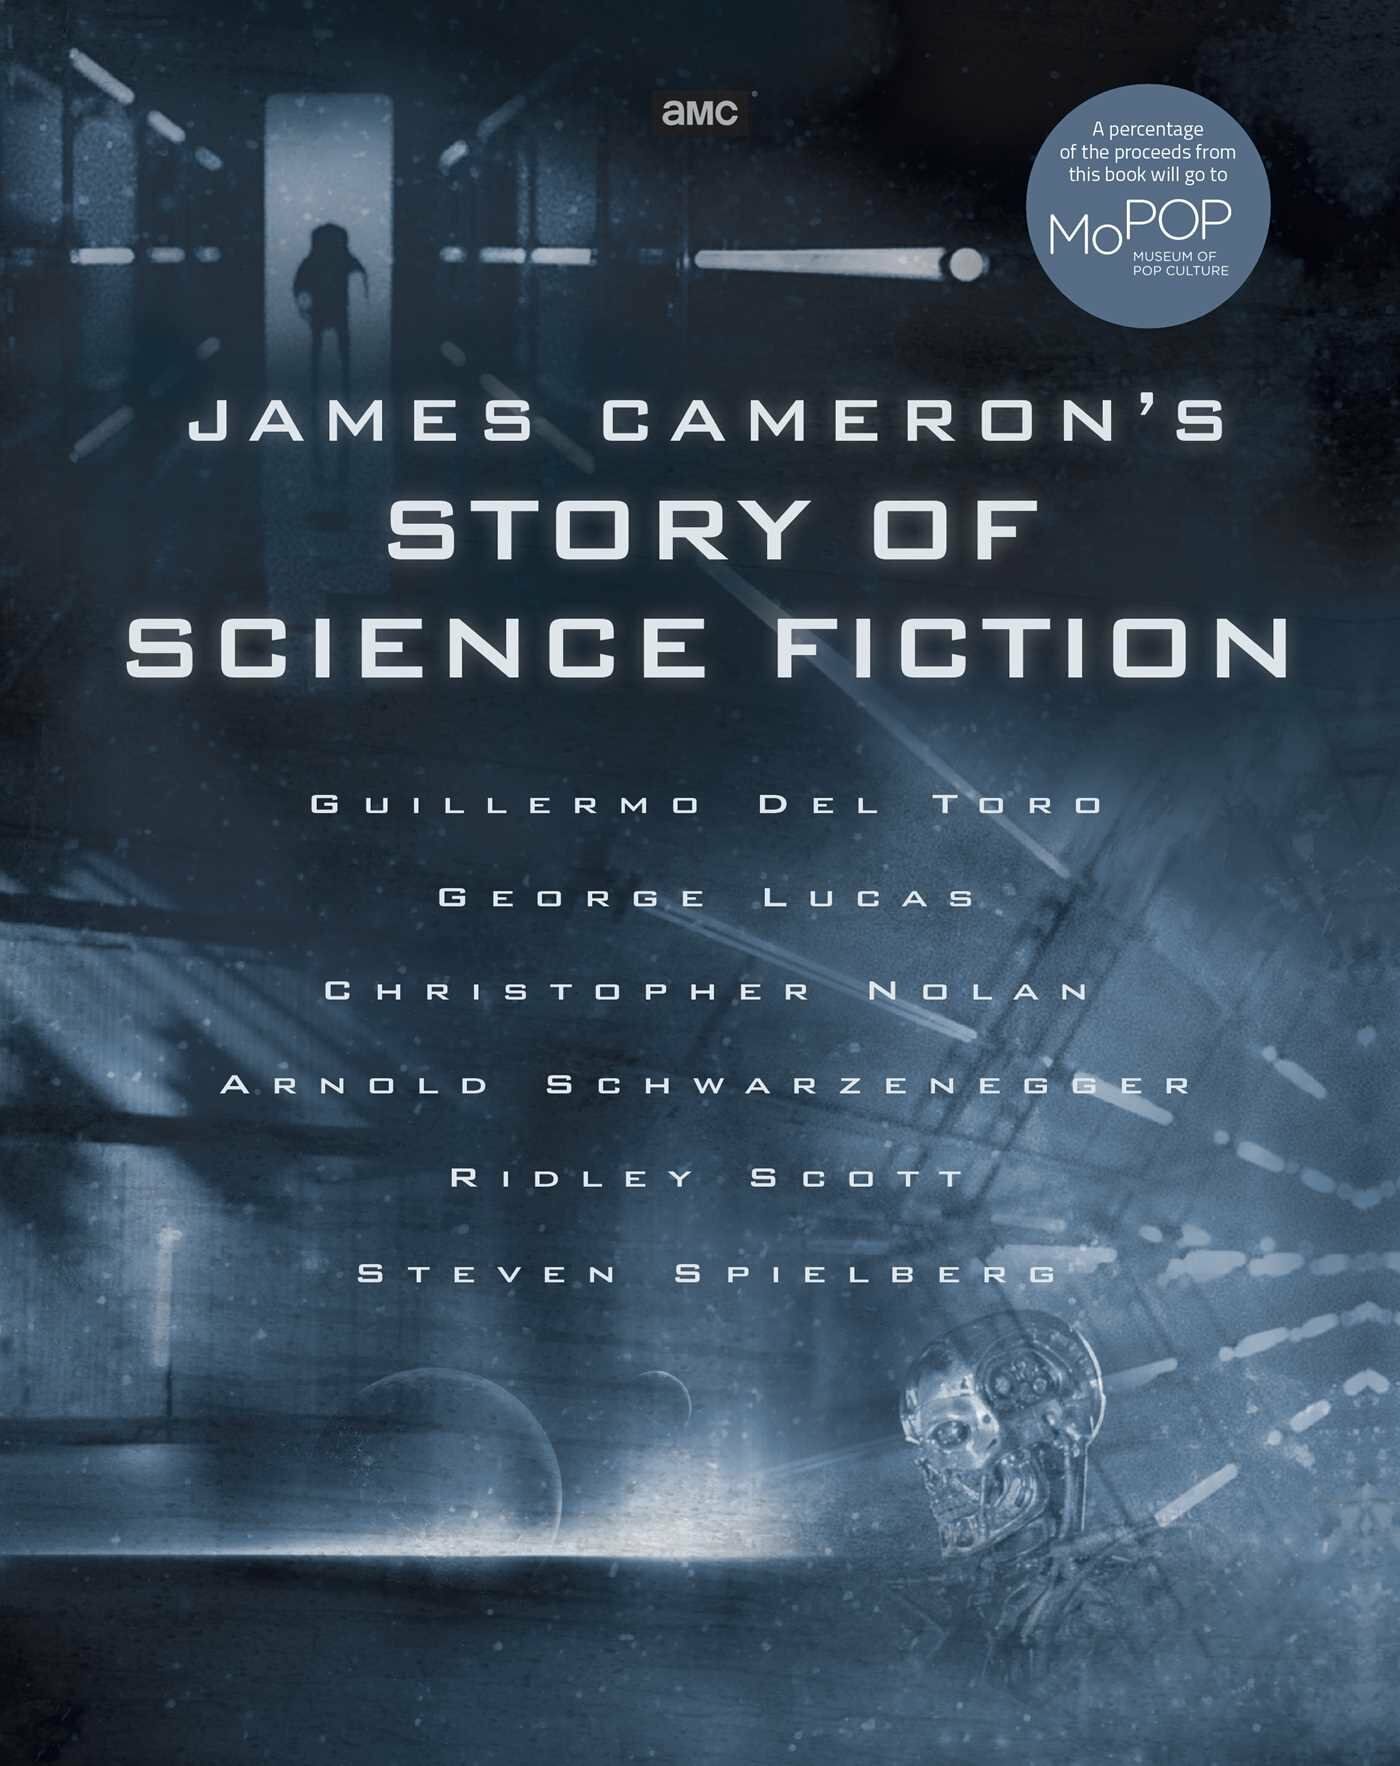 James Camerons Story of Science Fiction (Hardcover)